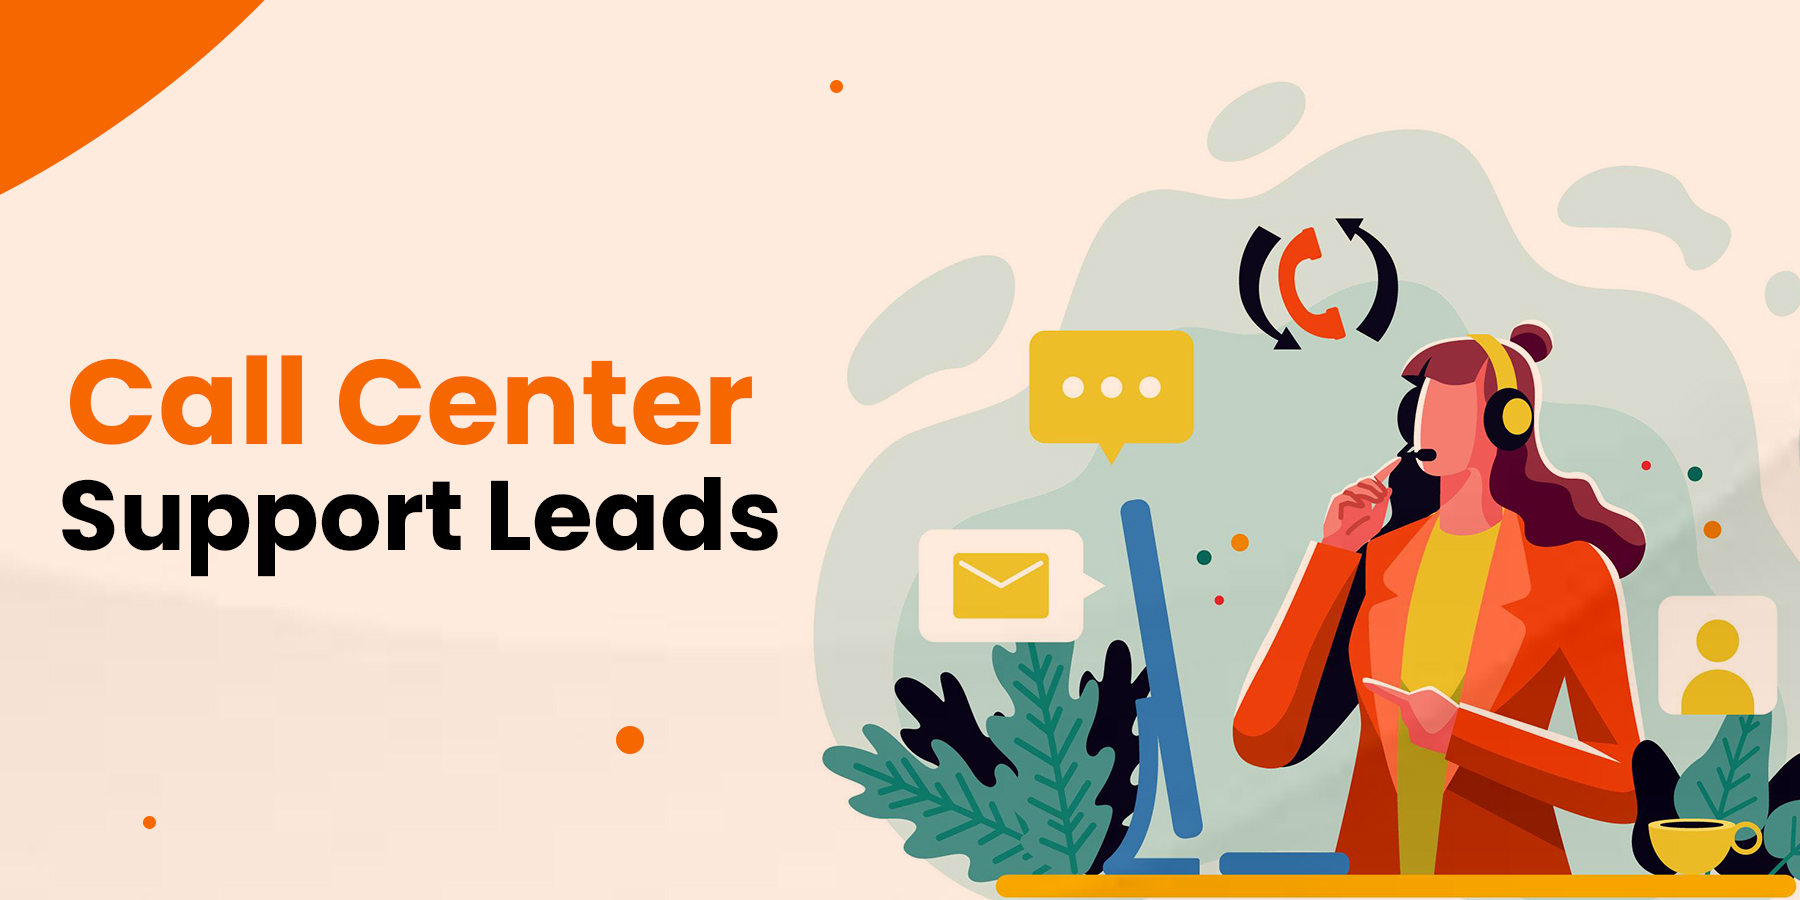 Call Center Support Leads